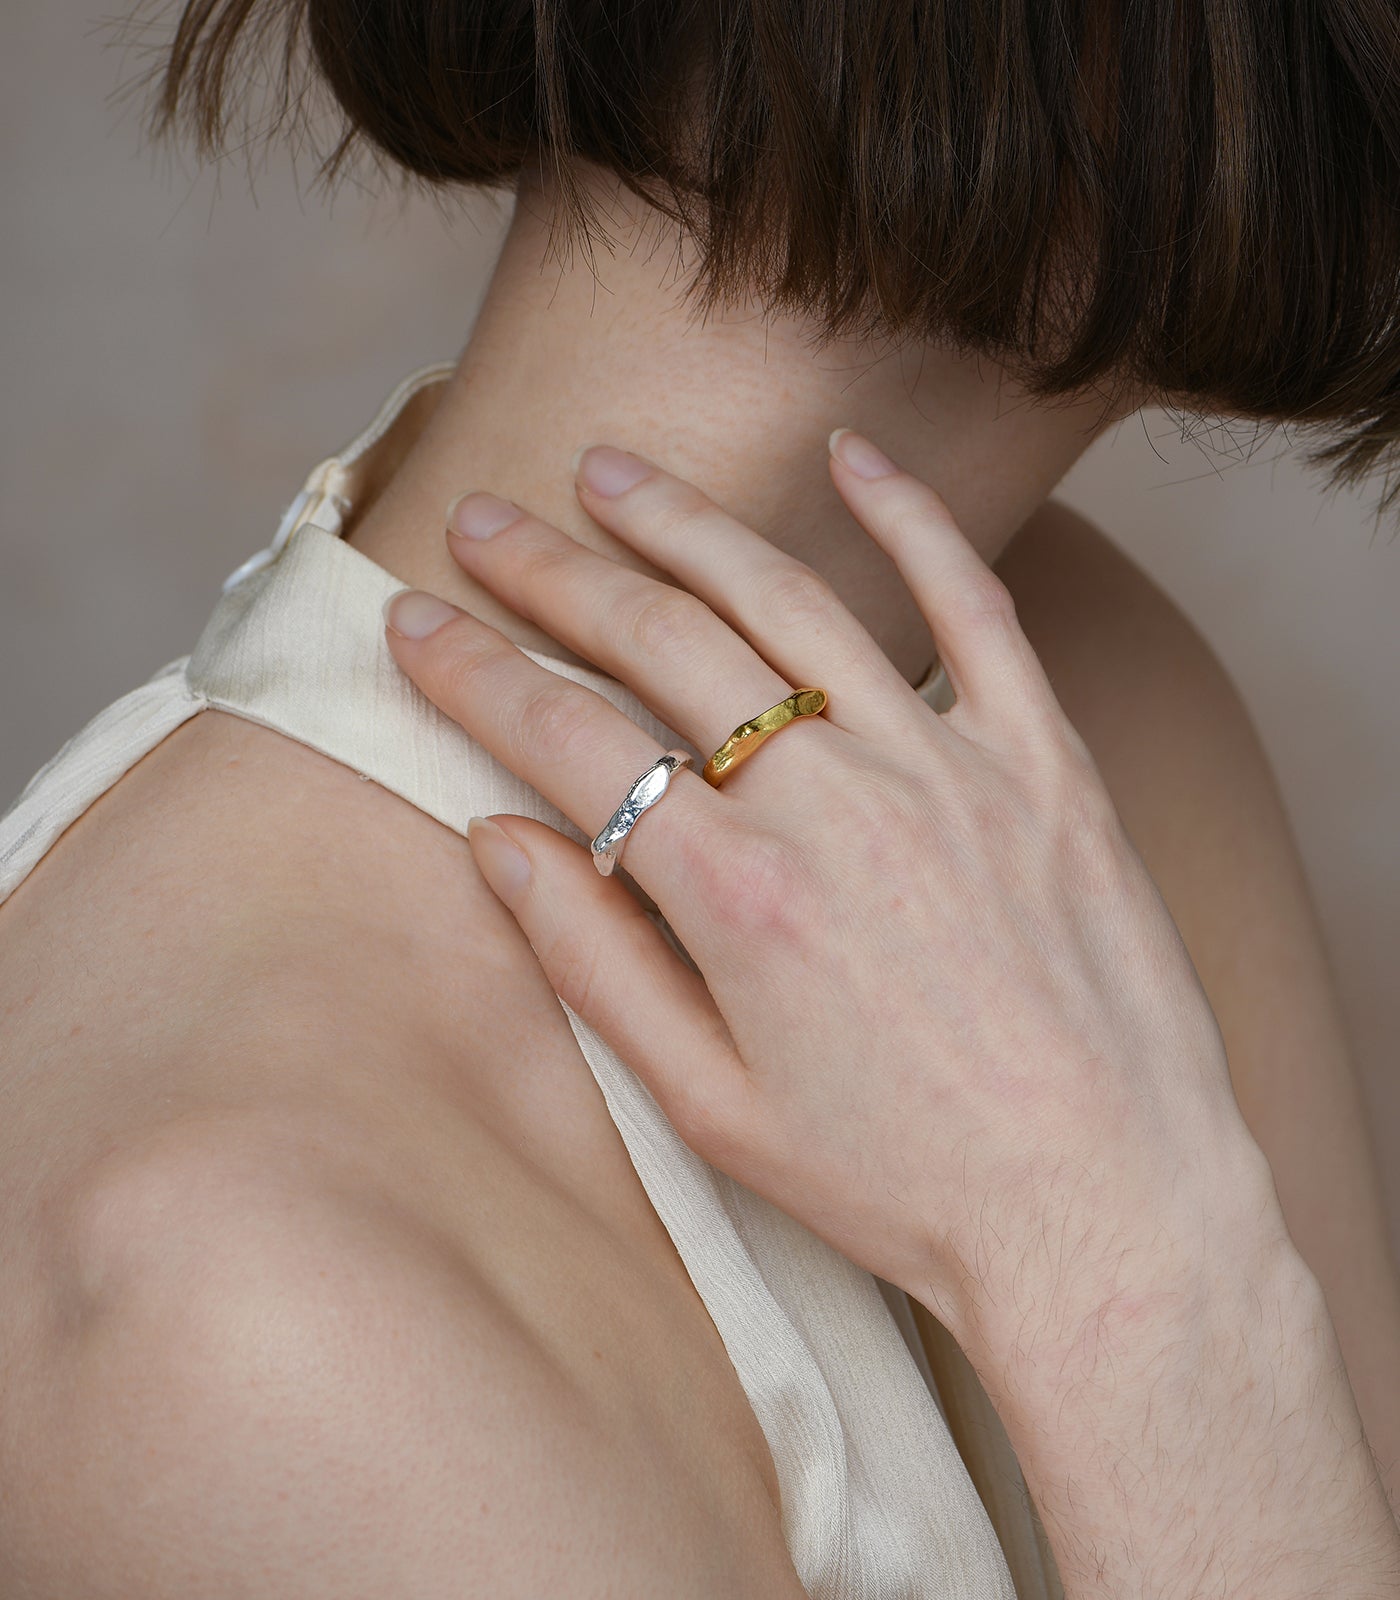 A model wears 2 rings, a sterling silver and gold vermeil ring. Each ring has a chunky band and organic rocky texture.